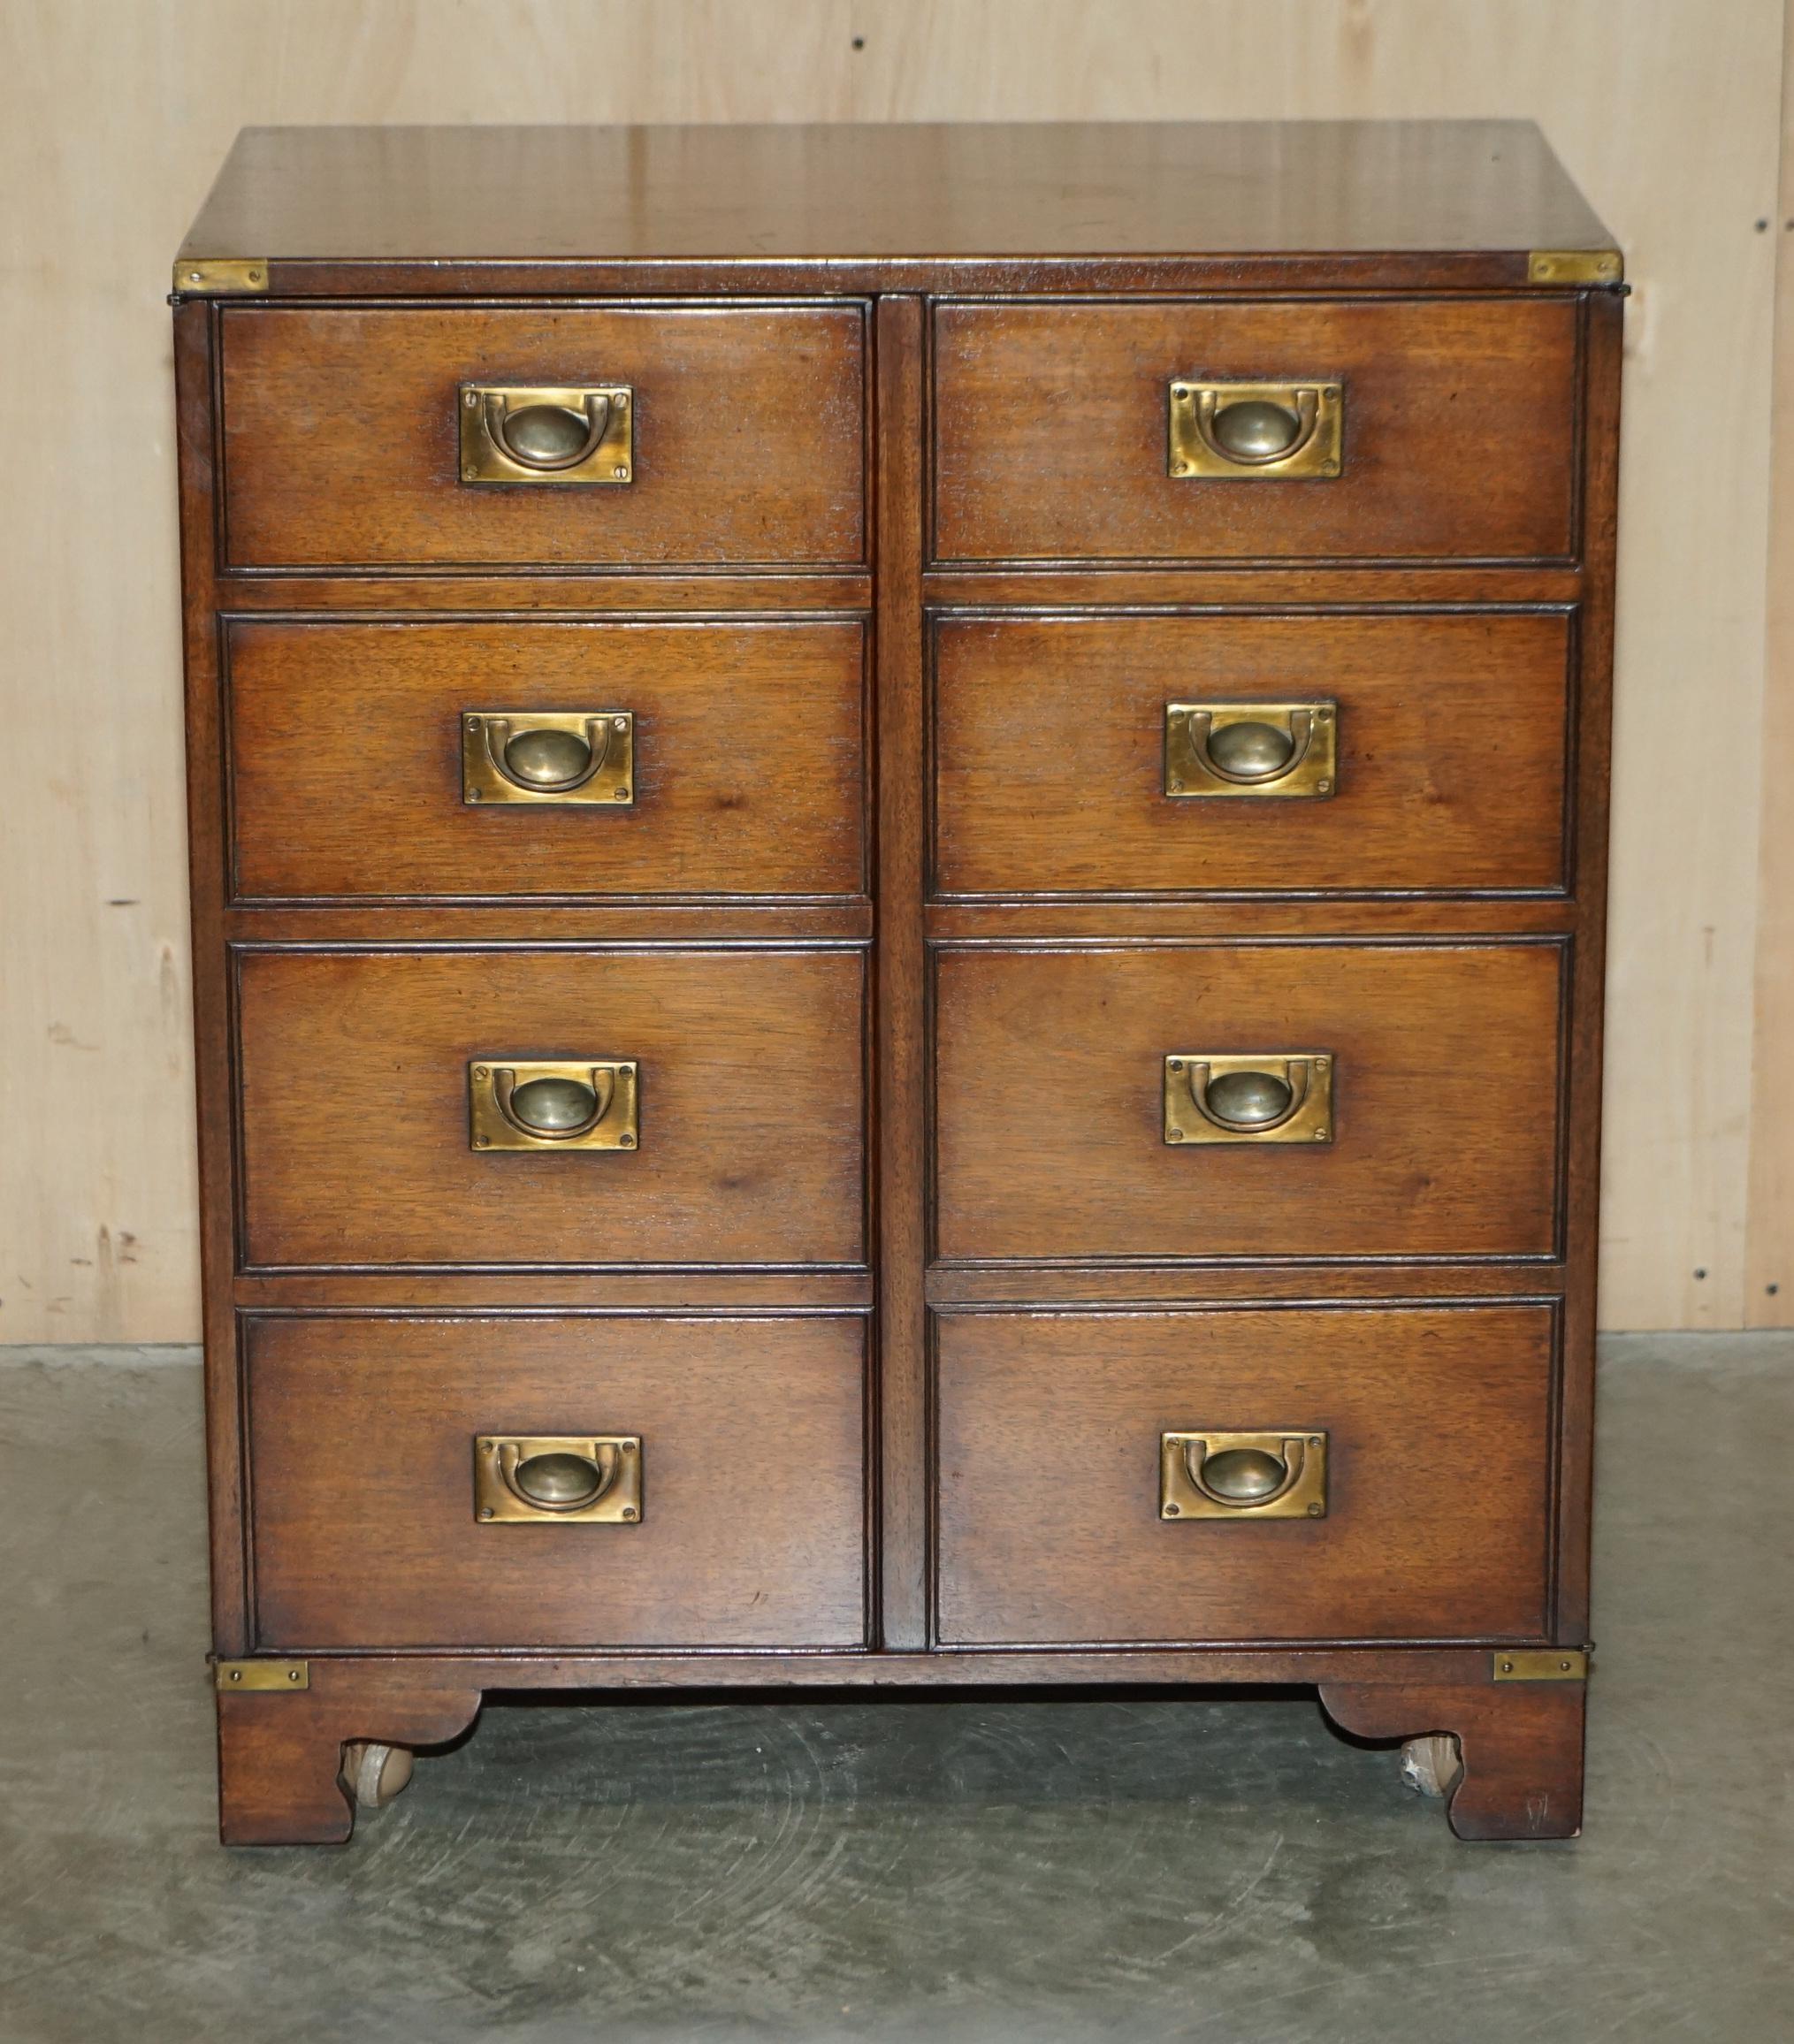 Royal House Antiques

Royal House Antiques is delighted to offer for sale this lovely faux drawer fronted Harrods Kennedy Military Campaign drinks cabinet or media TV unit 

Please note the delivery fee listed is just a guide, it covers within the